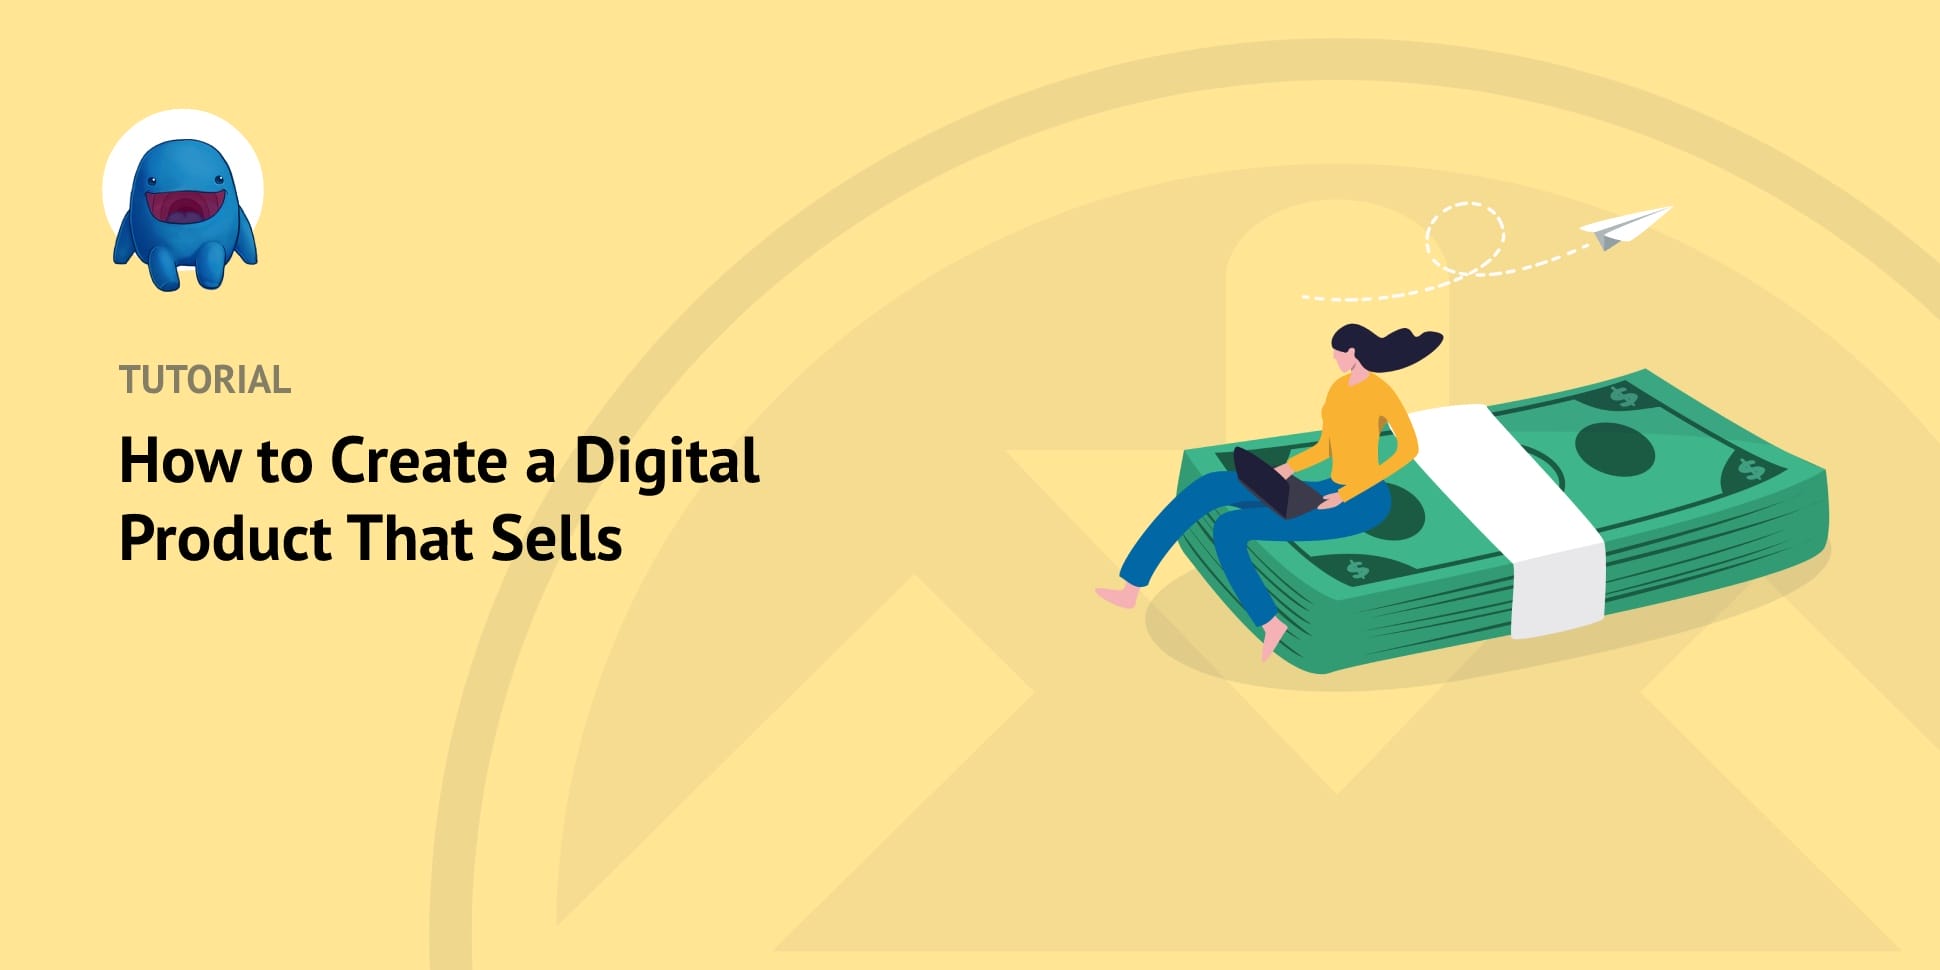 How to Create a Digital Product That Sells